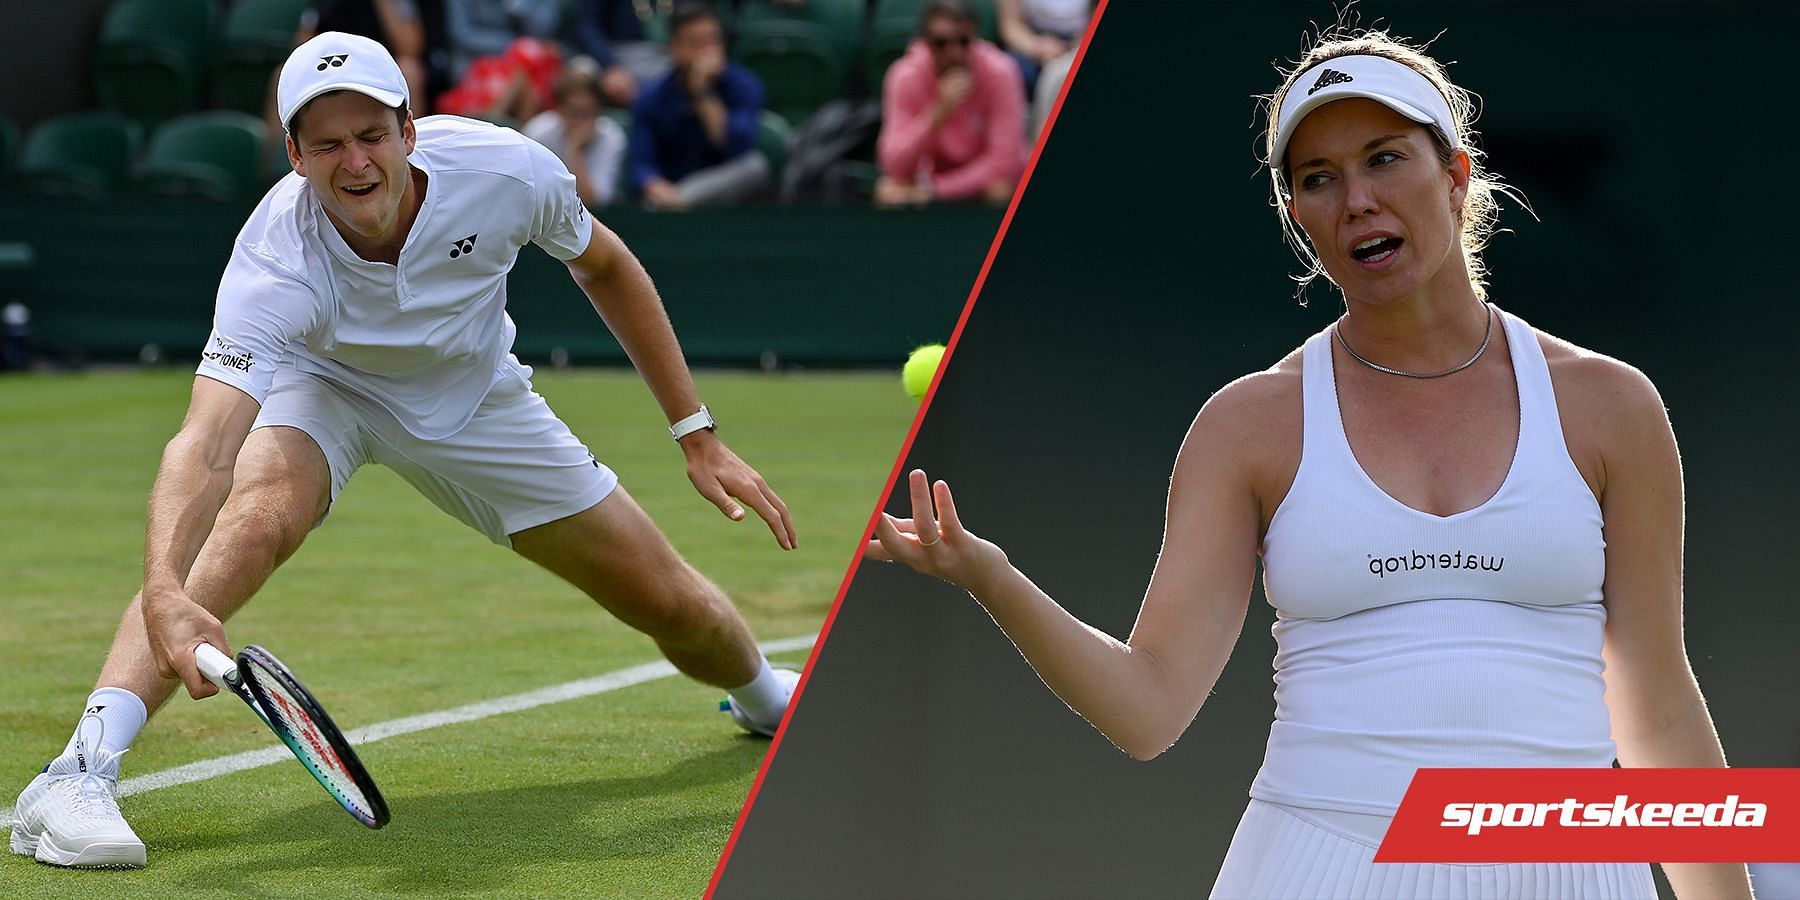 Hubert Hurkacz and Danielle Collins lost on the opening day at Wimbledon